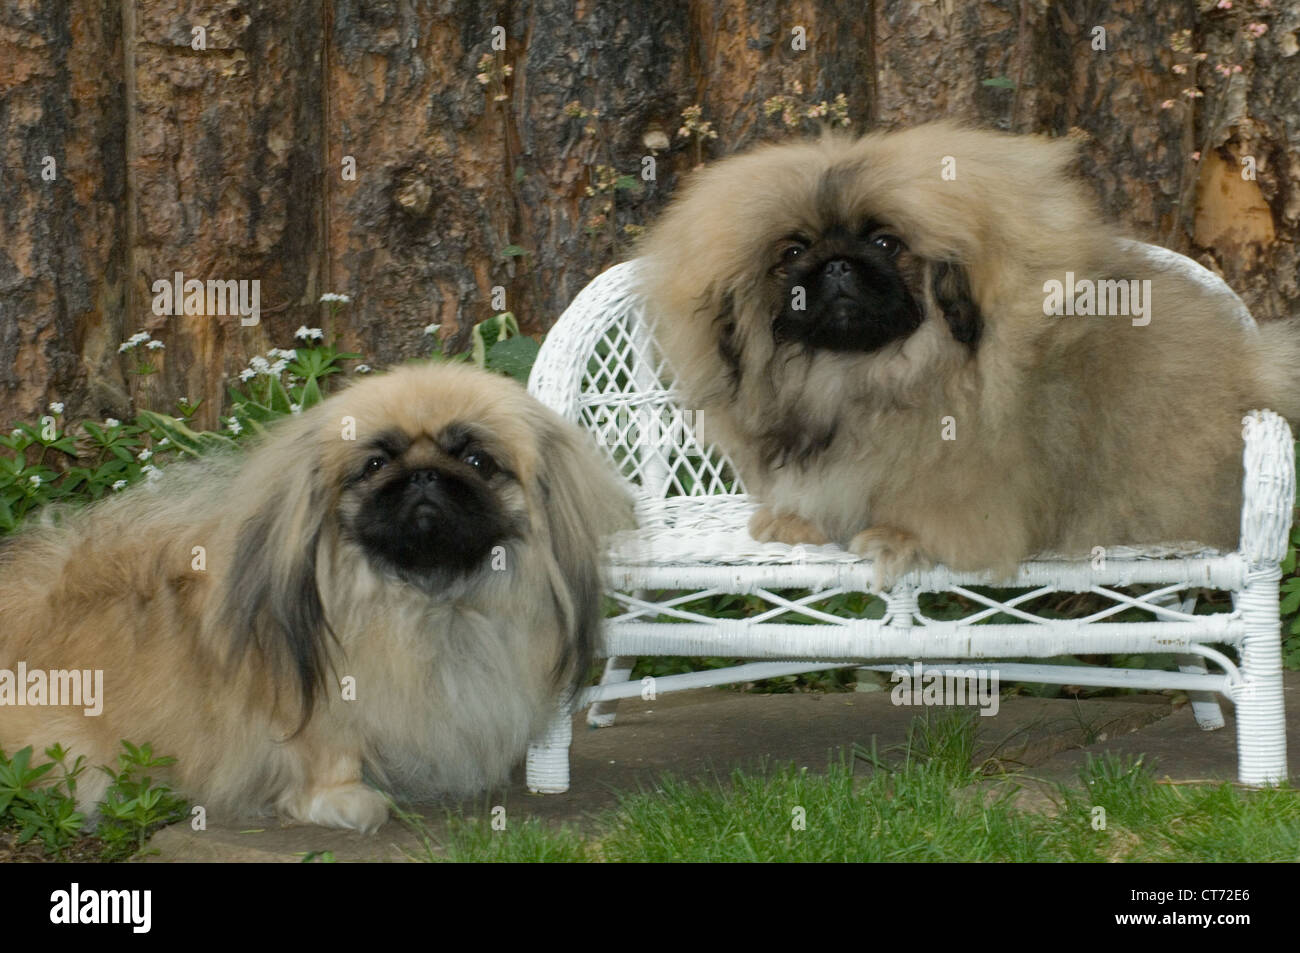 Pekingese puppy in wicker chair and adult standing by it Stock Photo